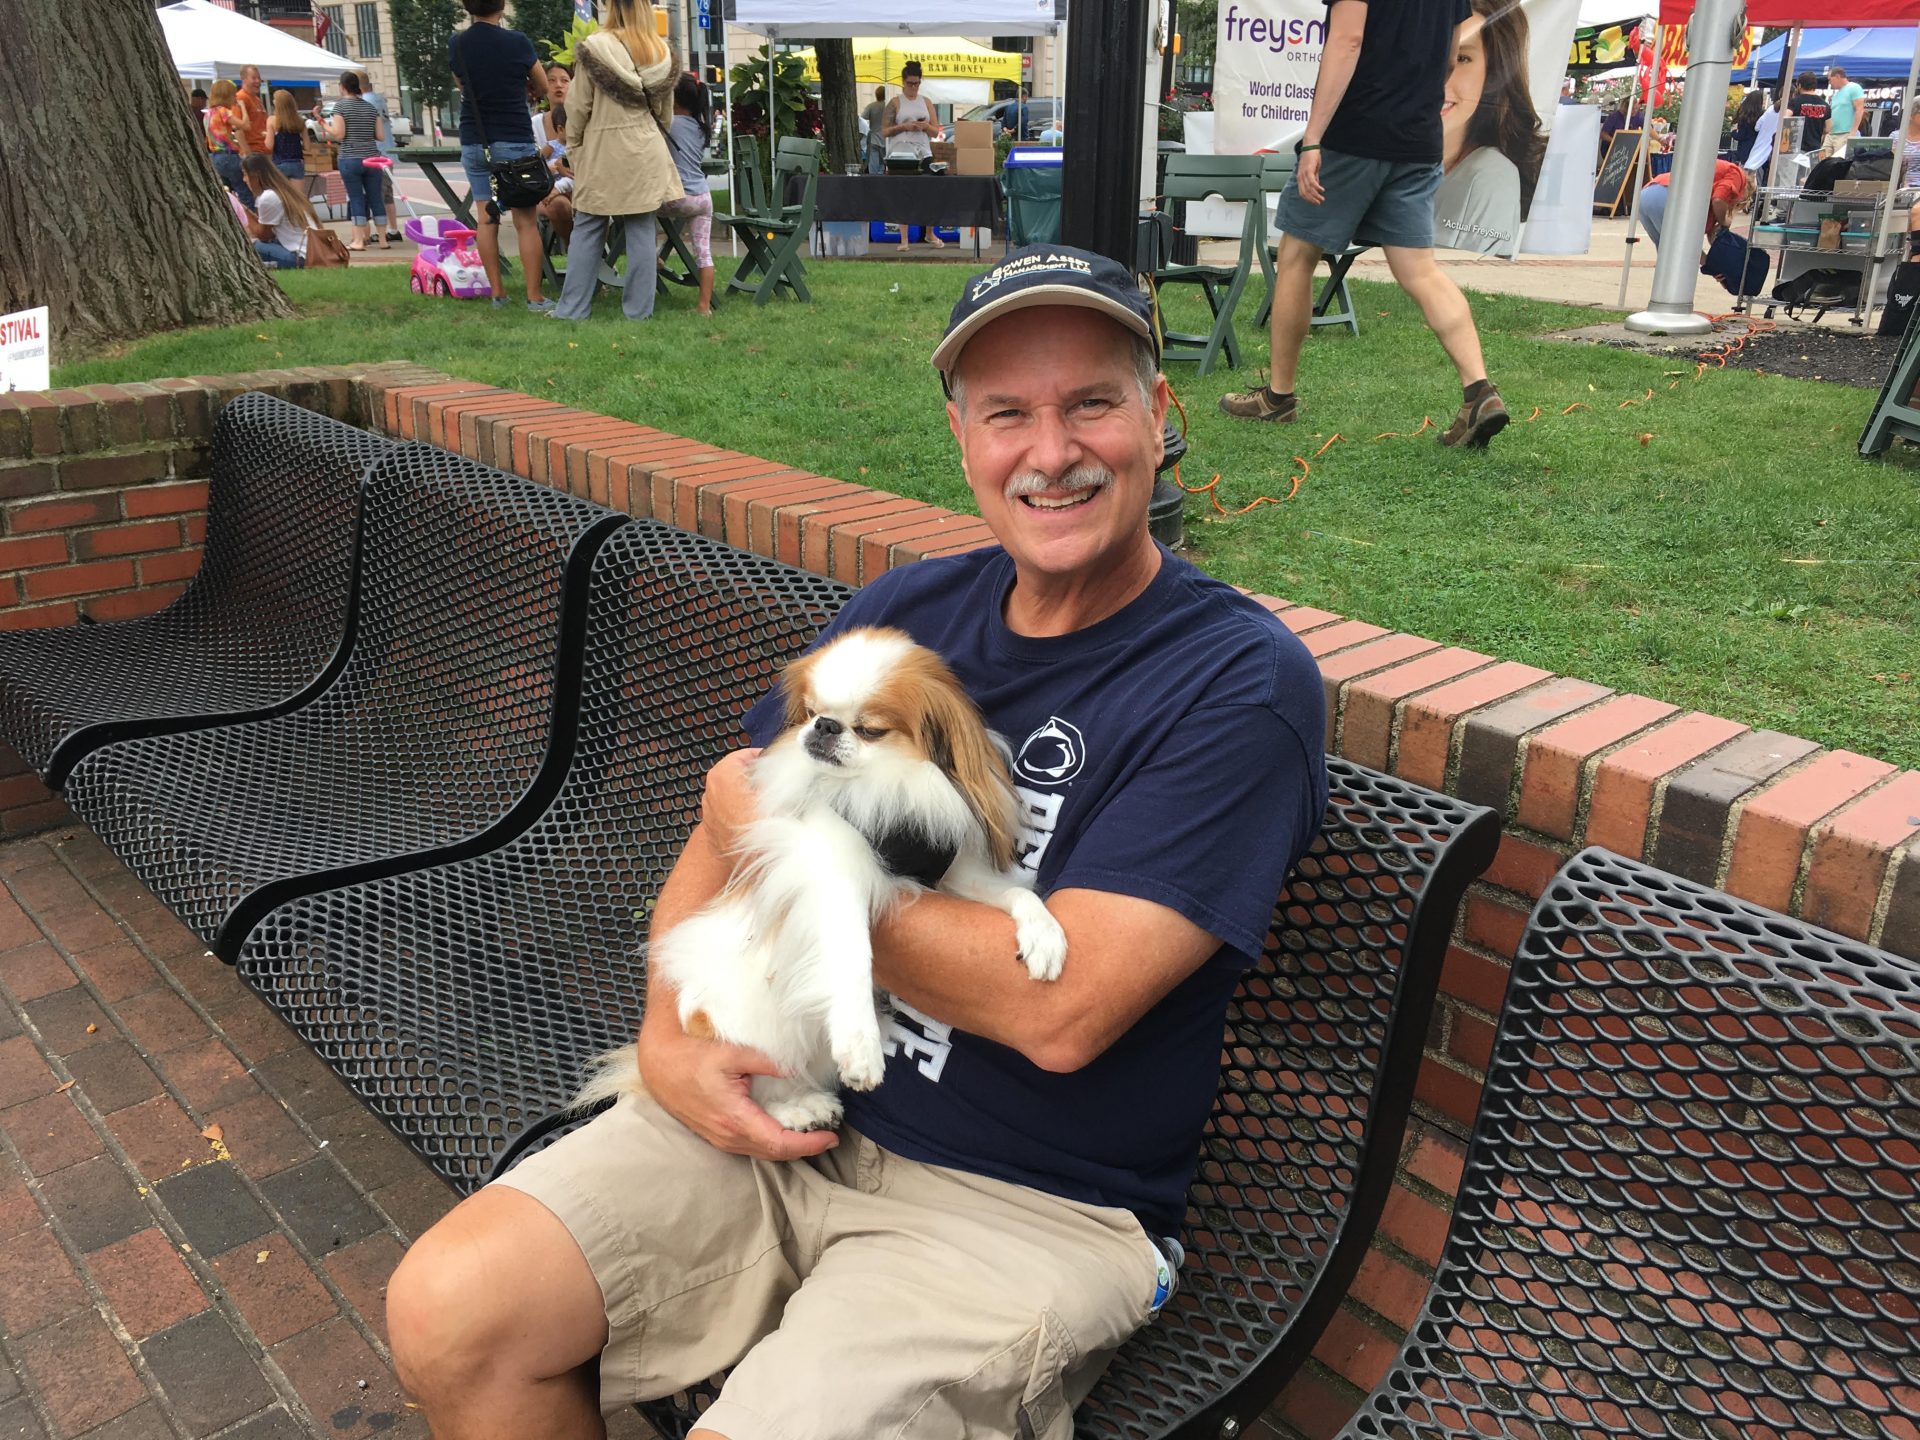 Republican Tom Krause sits with his dog in Easton on Sept. 15, 2018.